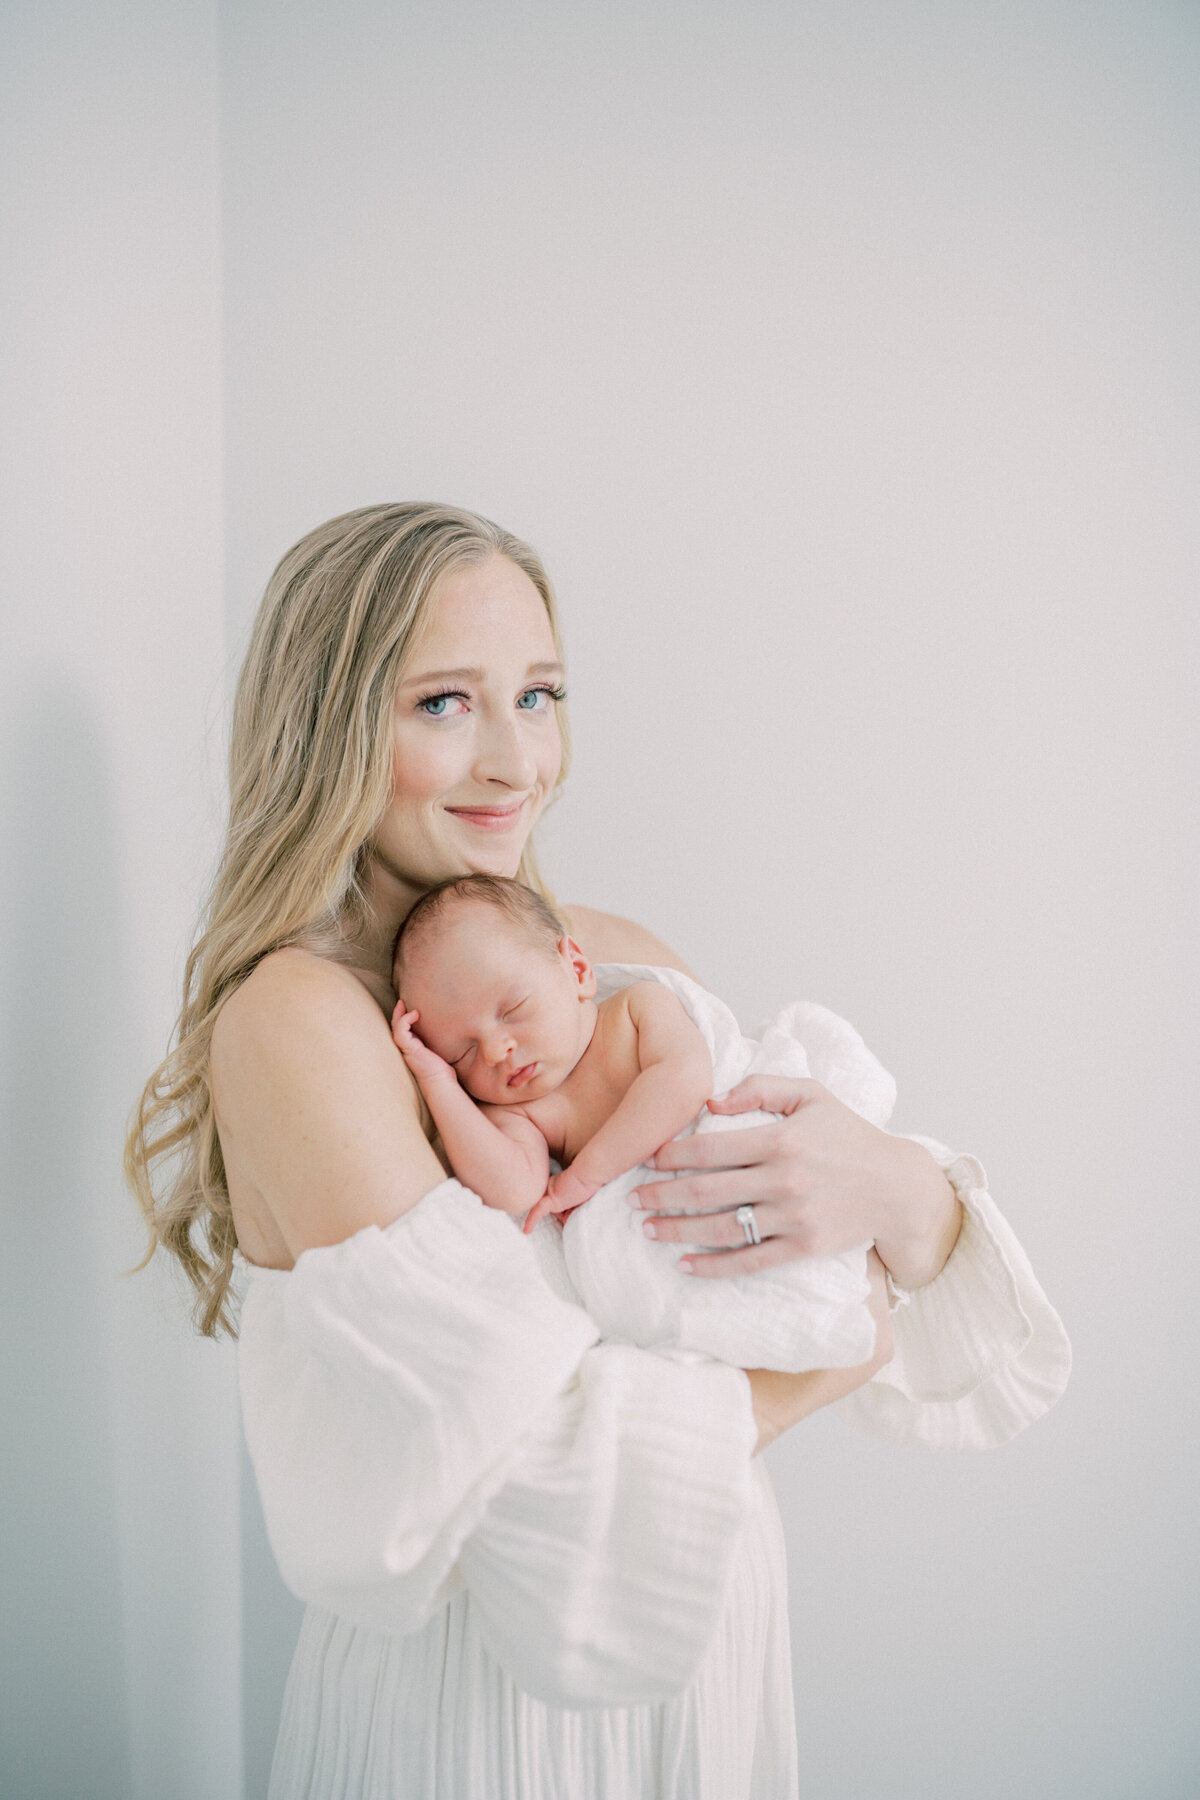 Blonde mother holds her newborn baby up to her chest as he sleeps peacefully